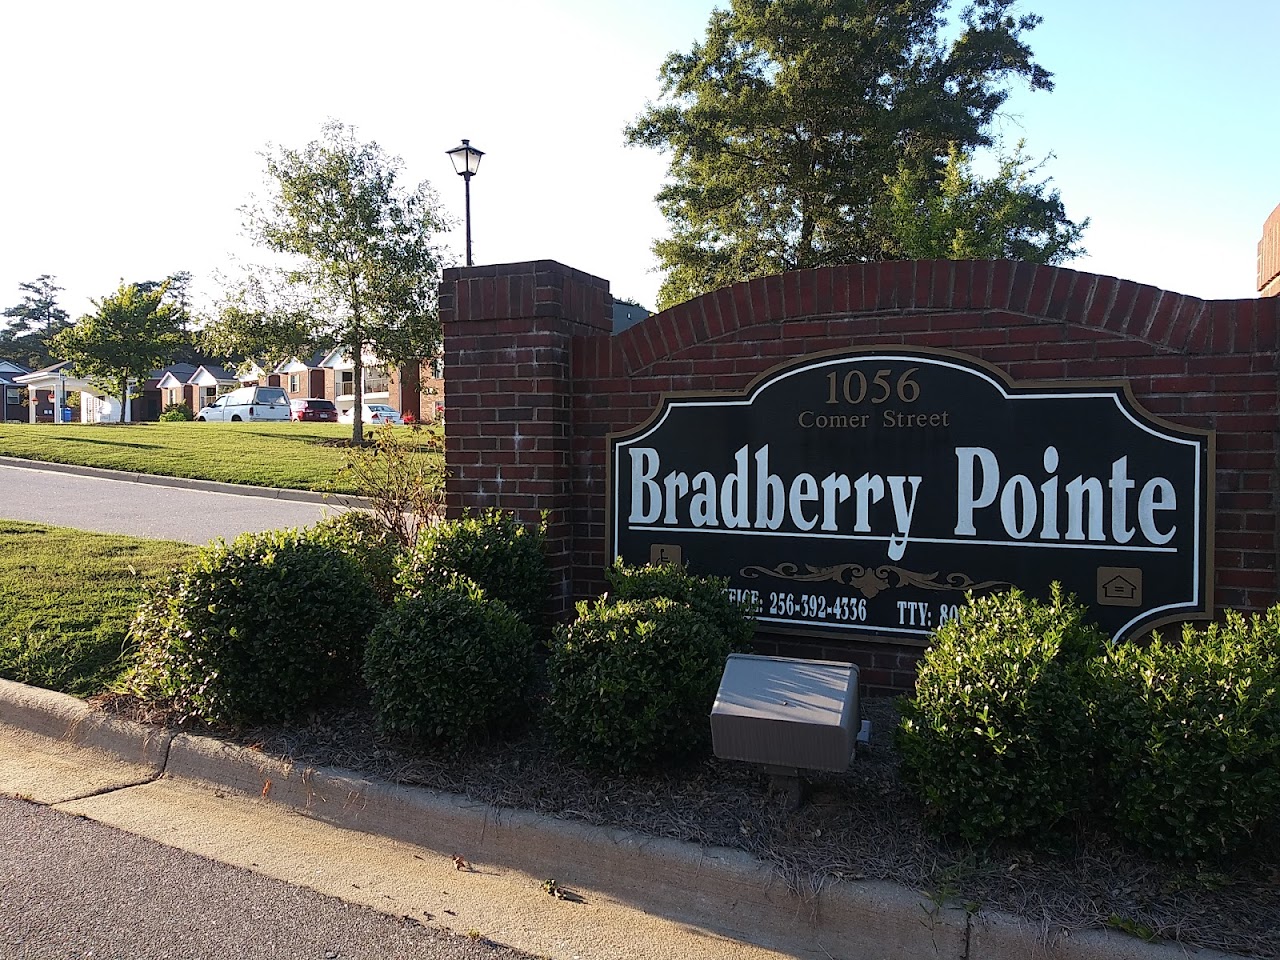 Photo of BRADBERRY POINTE. Affordable housing located at 1060 COMER ST ALEXANDER CITY, AL 35010